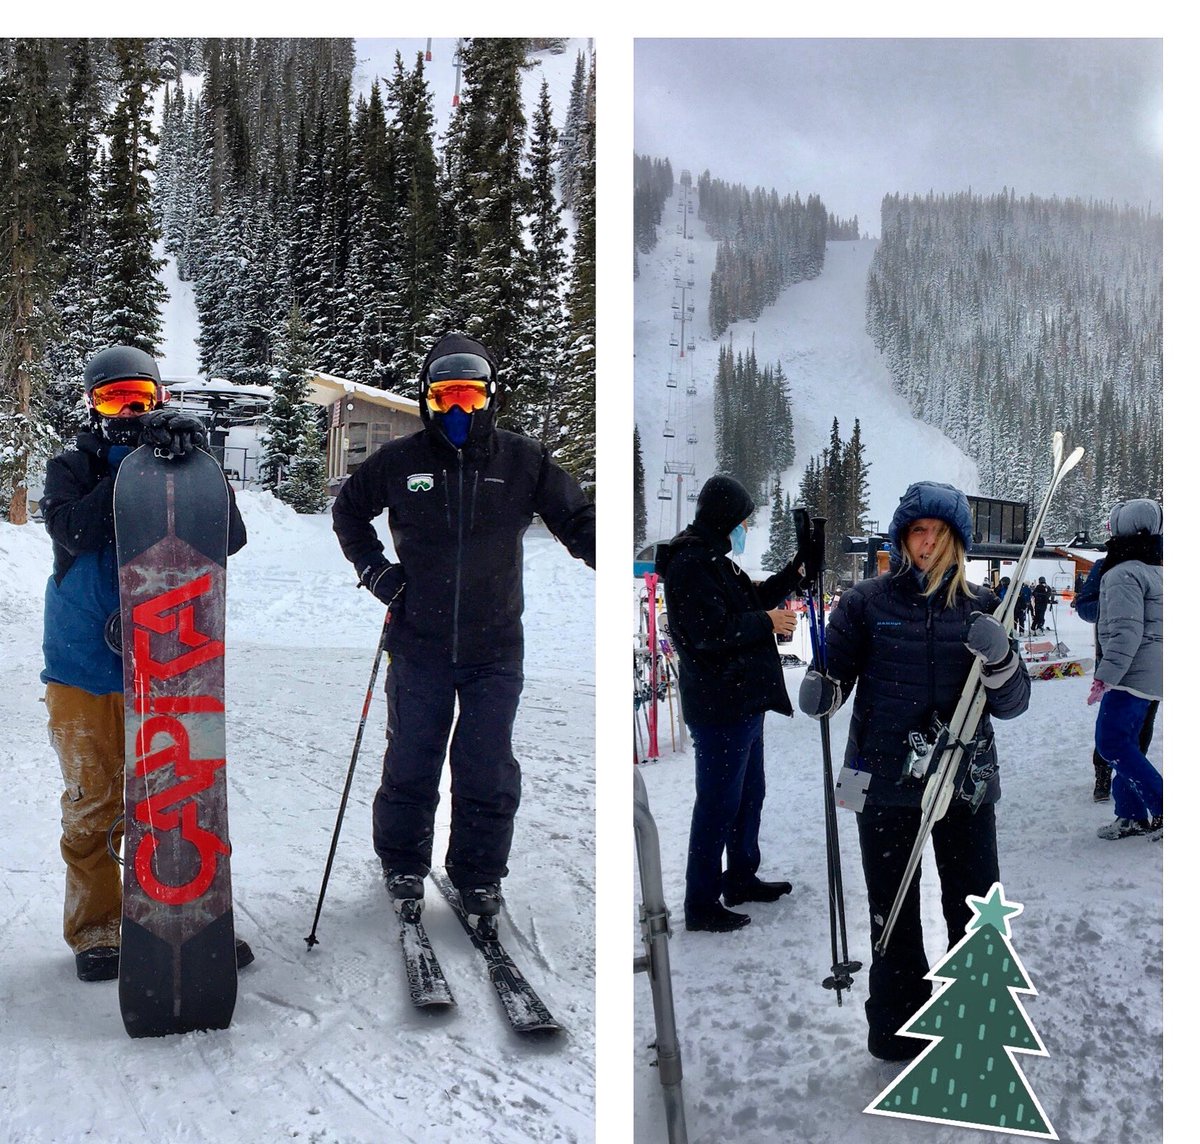 'The problem with winter sports is that--follow me closely here--they generally take place in winter.'😜 --Dave Barry @LovelandSkiArea #7degreesoffun 🎄#Merryalltheway